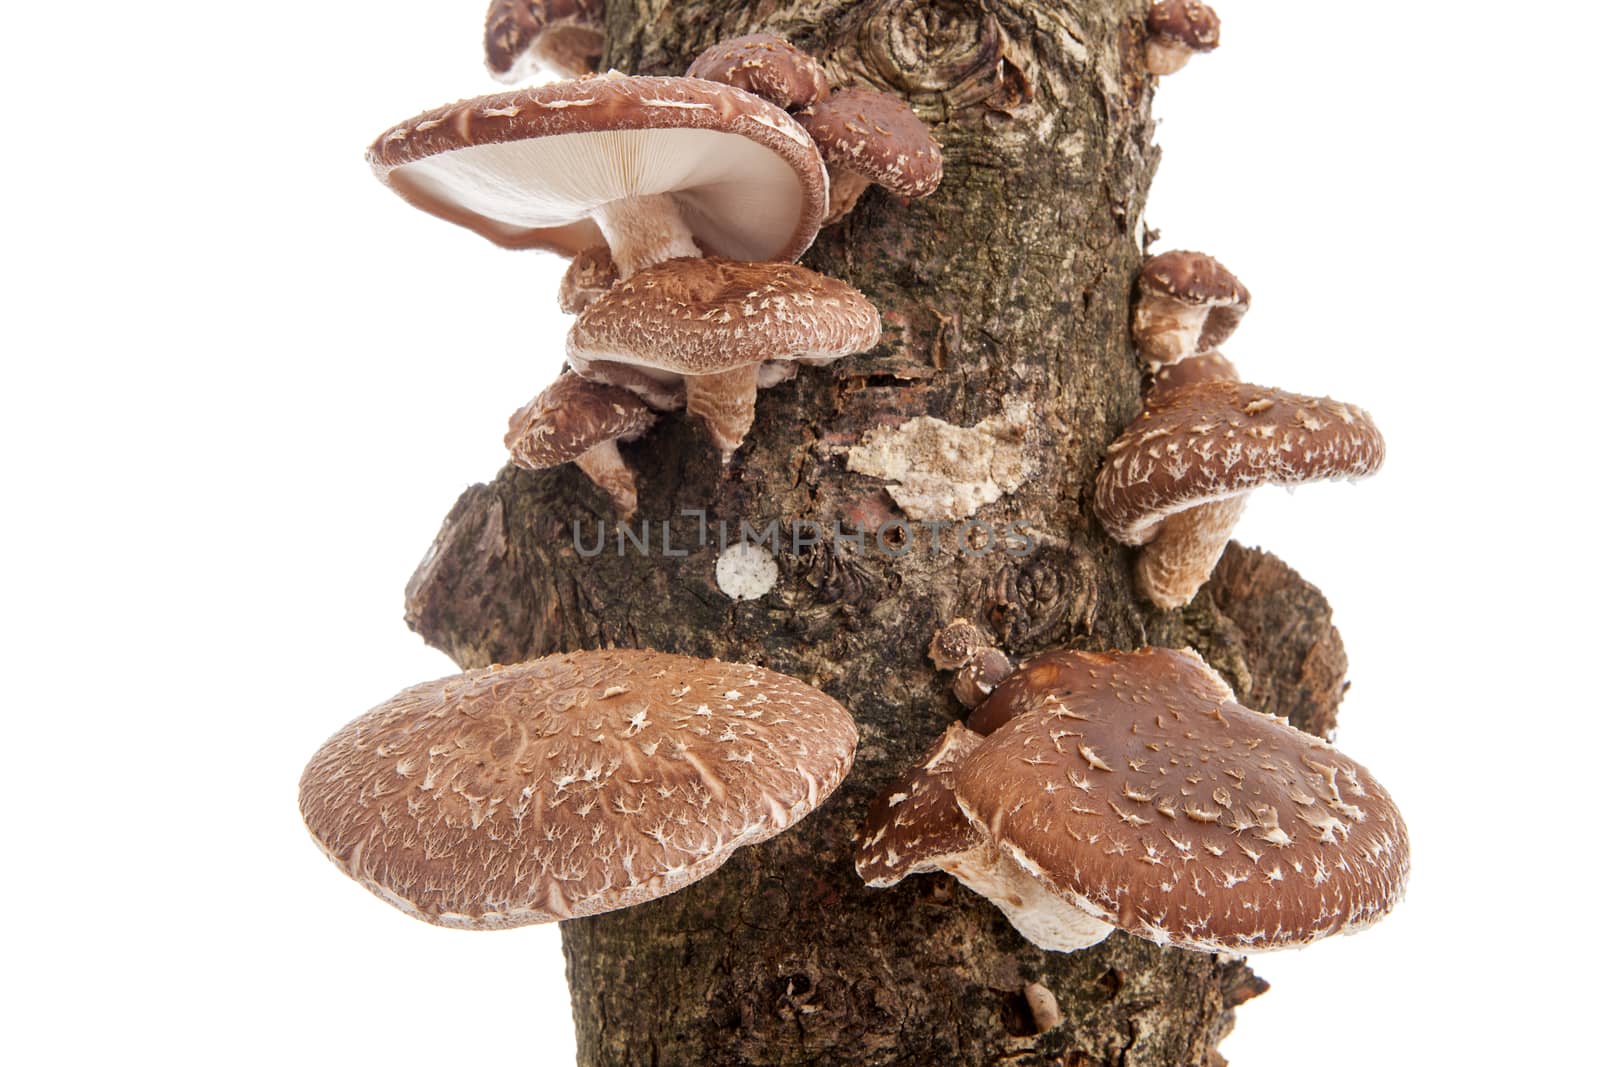 Tree trunk with Shiitake mushrooms over white background